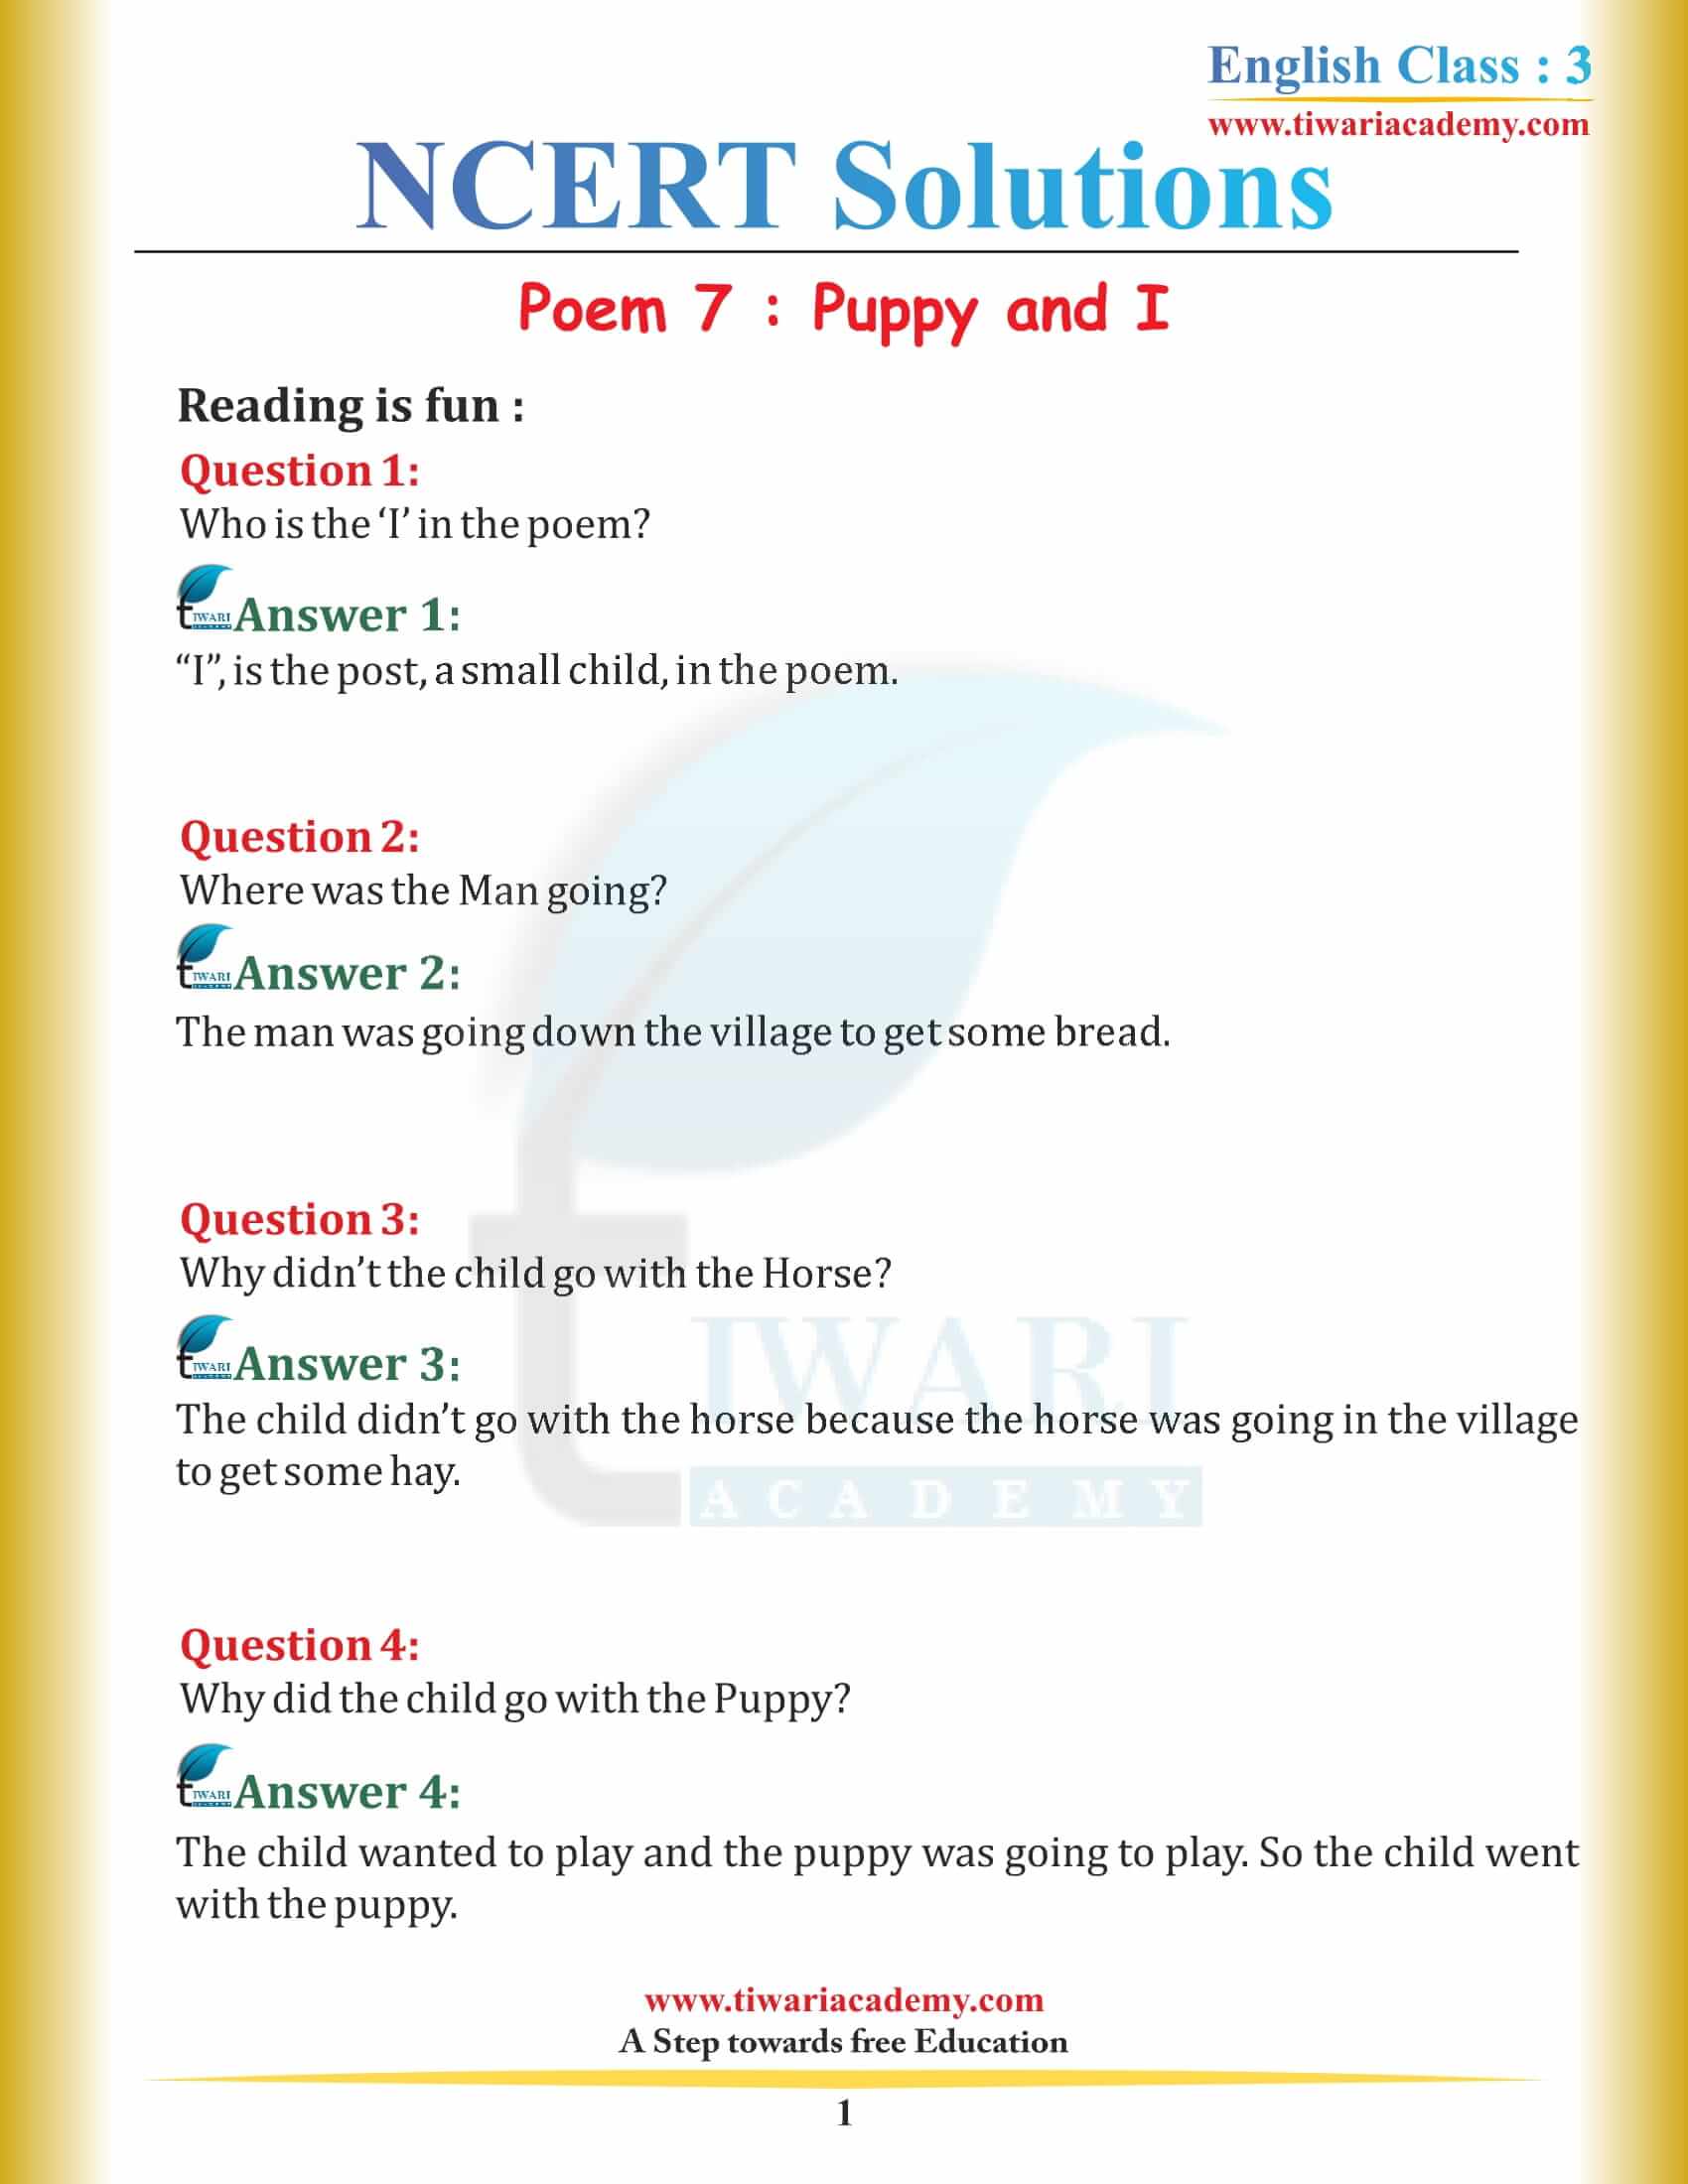 NCERT Solutions for Class 3 English Marigold 3 Unit 7 Chapter 1 Puppy